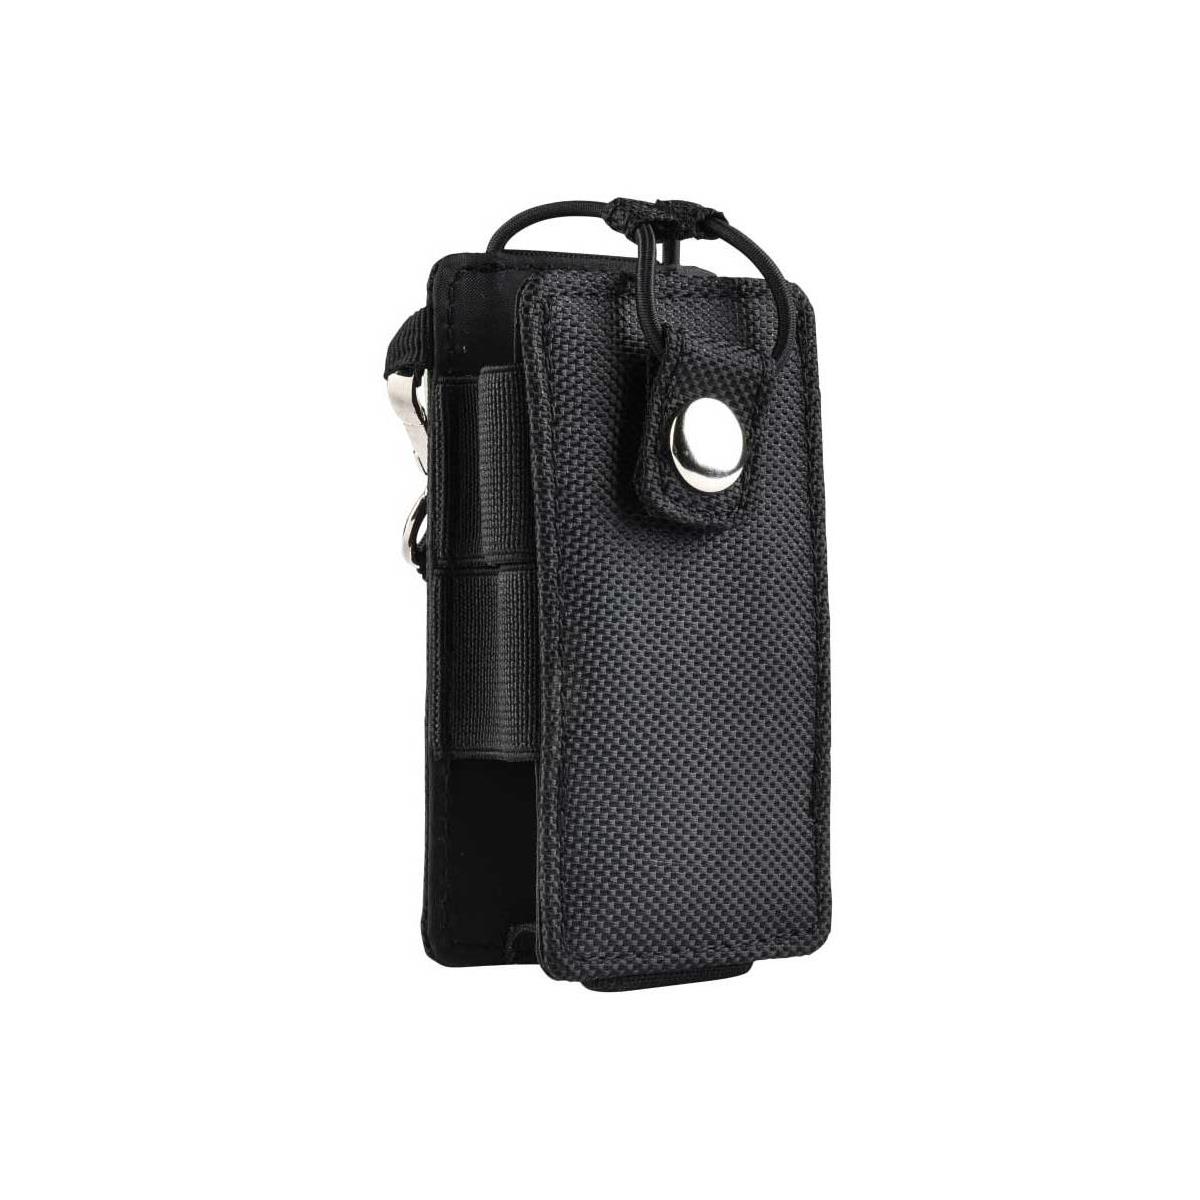 Image of Motorola Talkabout Carry Pouch T200